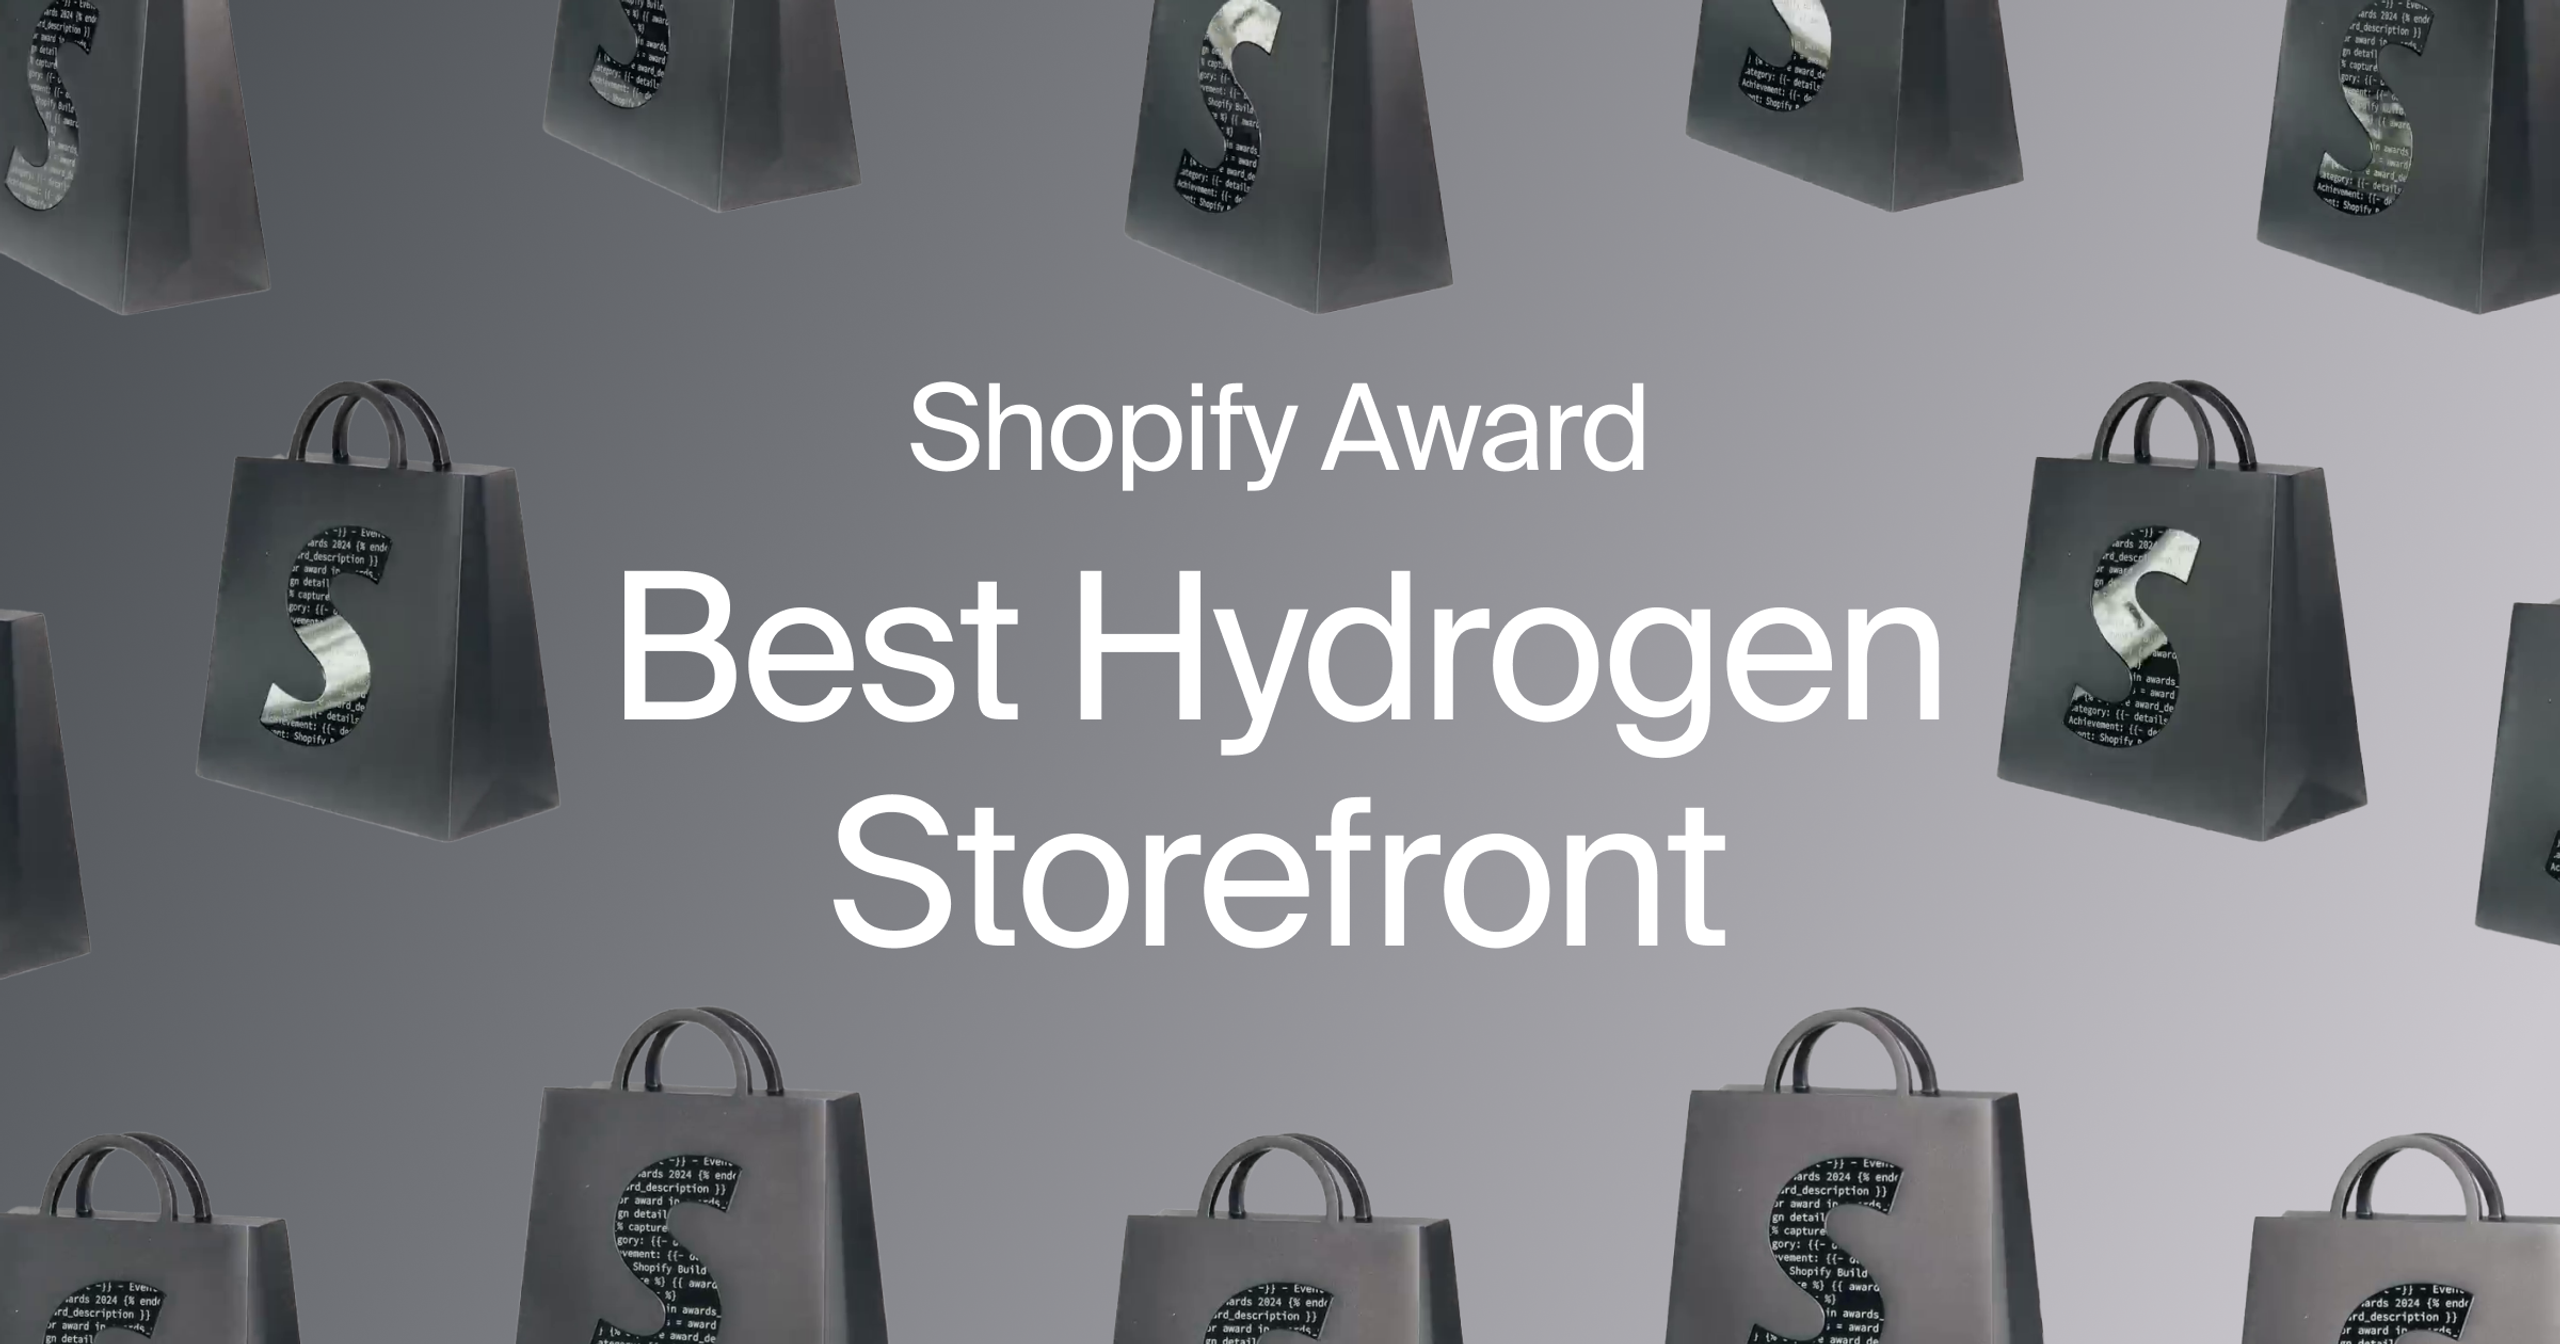 Graphic of multiple Shopify Build Award figurines in the shape of gray shopping bags with a large 'S' on them, containing code snippets inside the letter. The text 'Shopify Award Best Hydrogen Storefront' is prominently displayed in white on a gray background